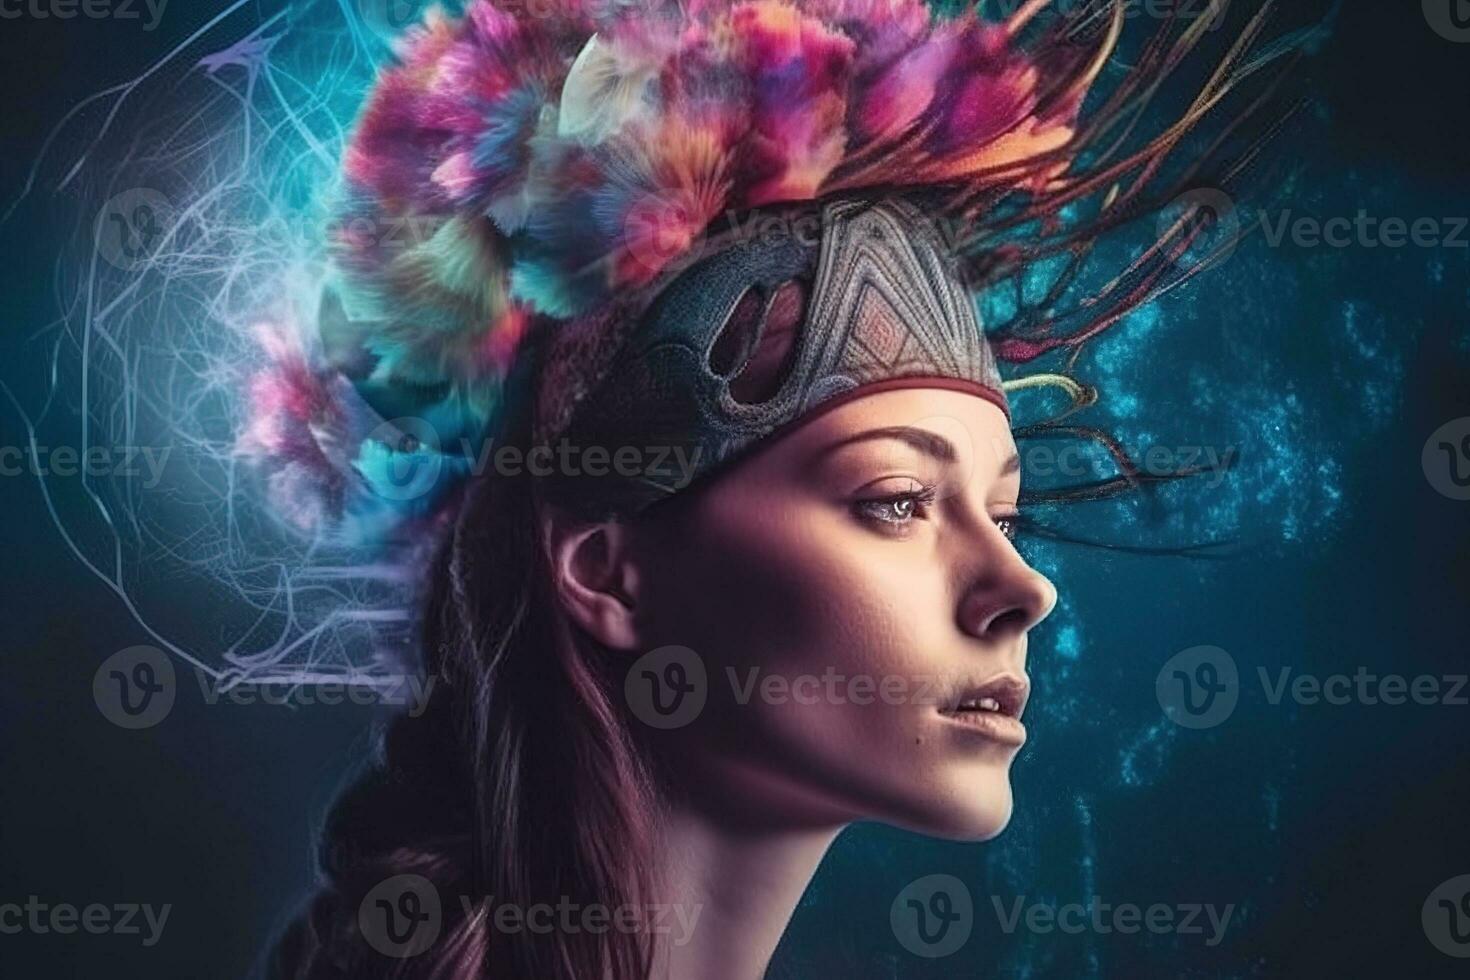 A Muse clinic, cutting edge experimental treatments with psychedelics and neurotechnology to alter perceptions, enhance creativity and reimagine problems in innovative ways. Generative AI photo